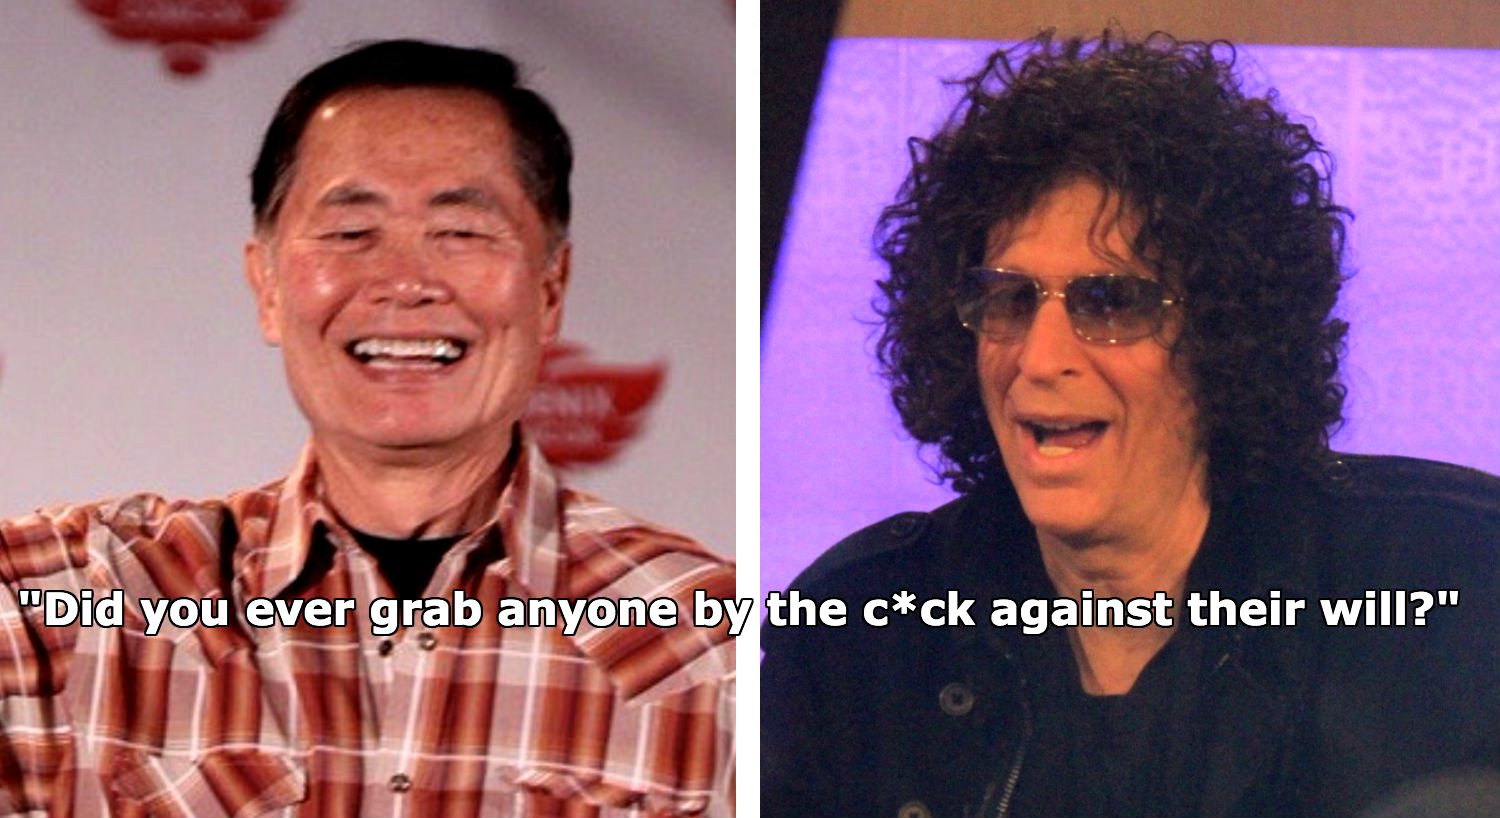 George Takei Told Howard Stern How He Gets Men to Have Sex With Him